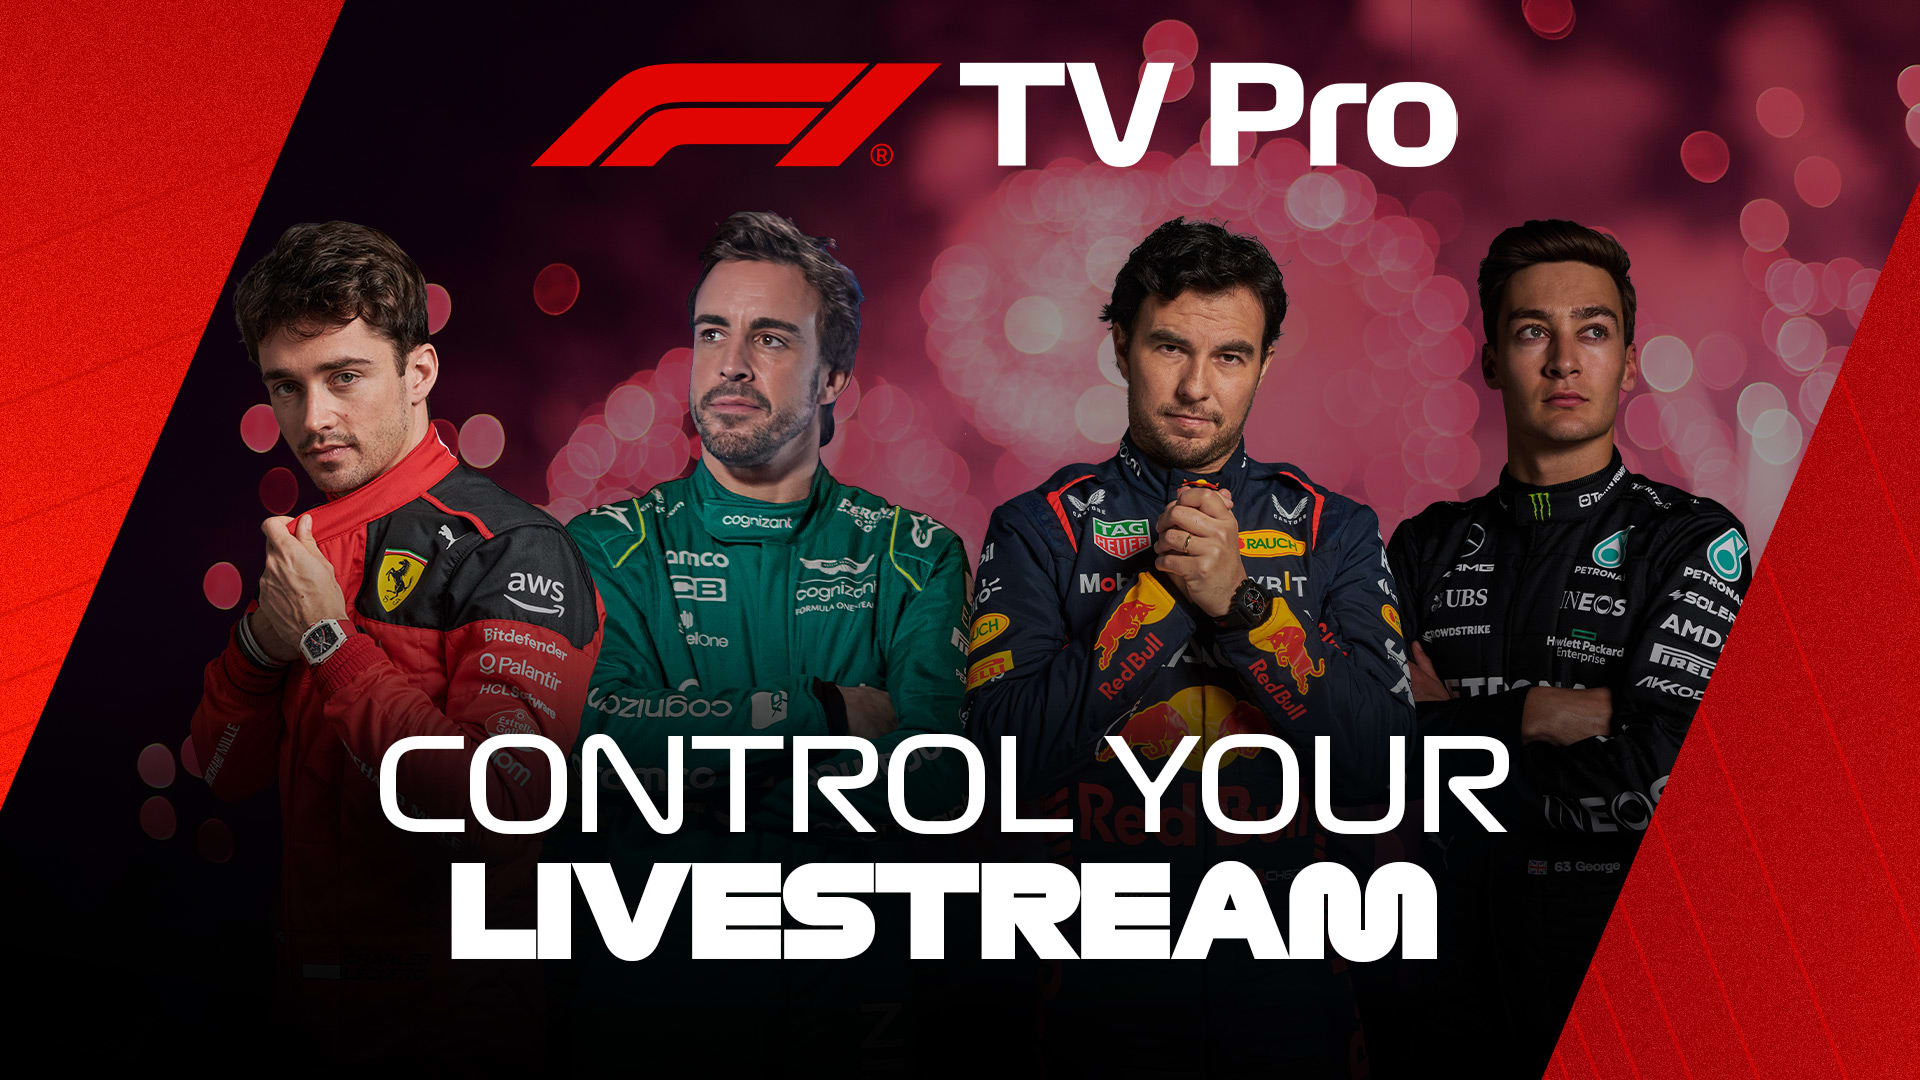 How to stream the 2023 Canadian Grand Prix on F1 TV Pro Formula 1®